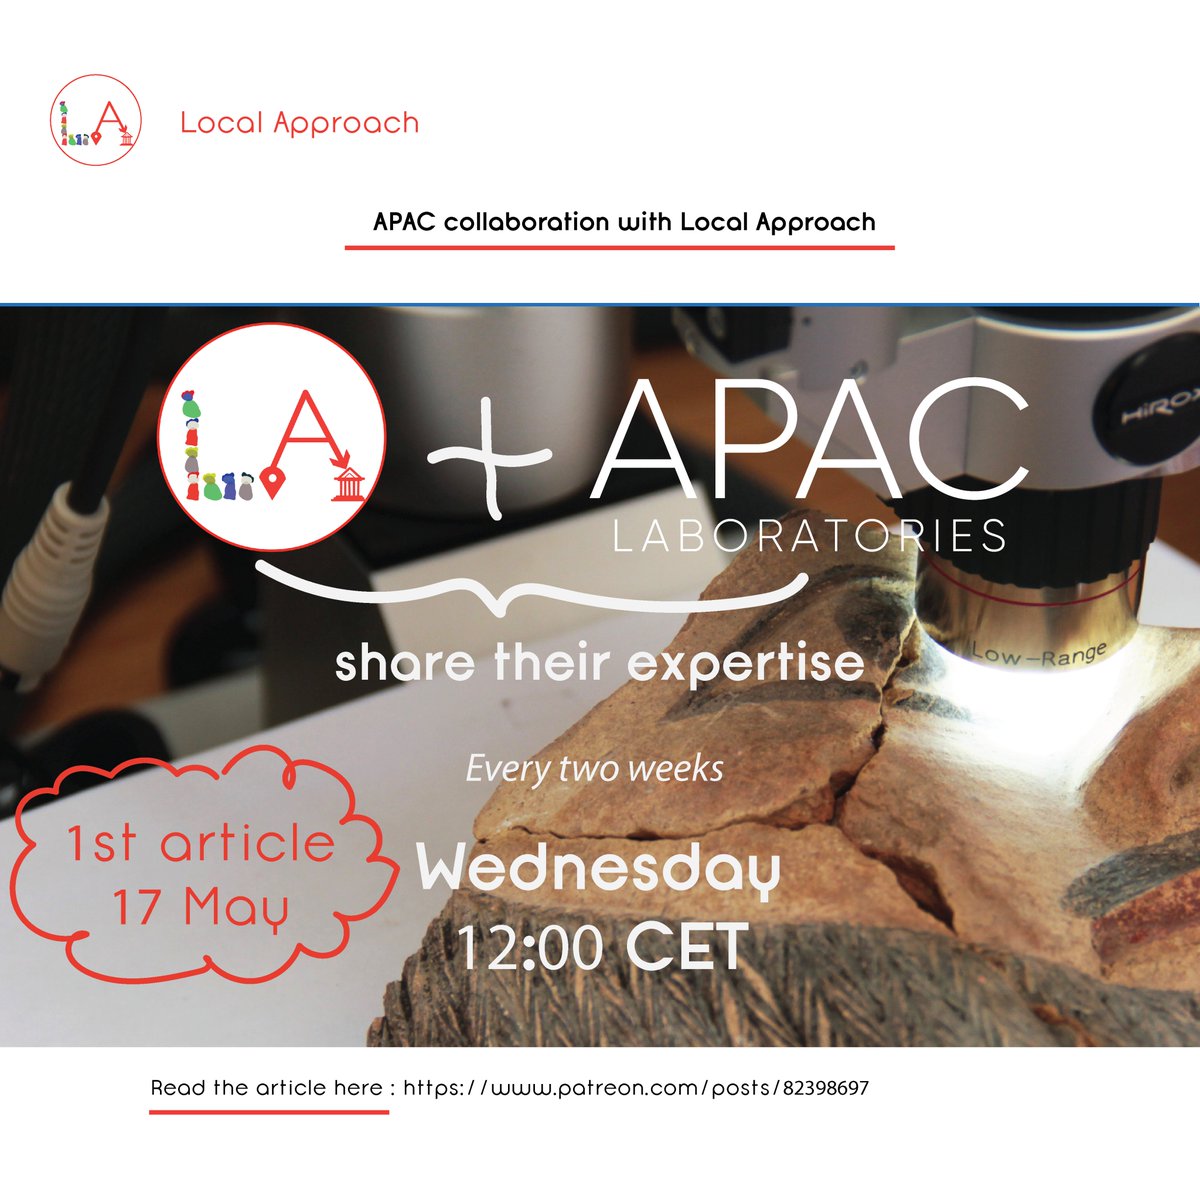 #APAC collaboration with #LocalApproach

patreon.com/posts/apac-wit…

#TheCyprusInstitute #newcollab #APACLabs #Cyprus #AndreasPittasArtCharacterizationLaboratories #APACarticles #APACprojects #culturalheritage #culturalmanagement